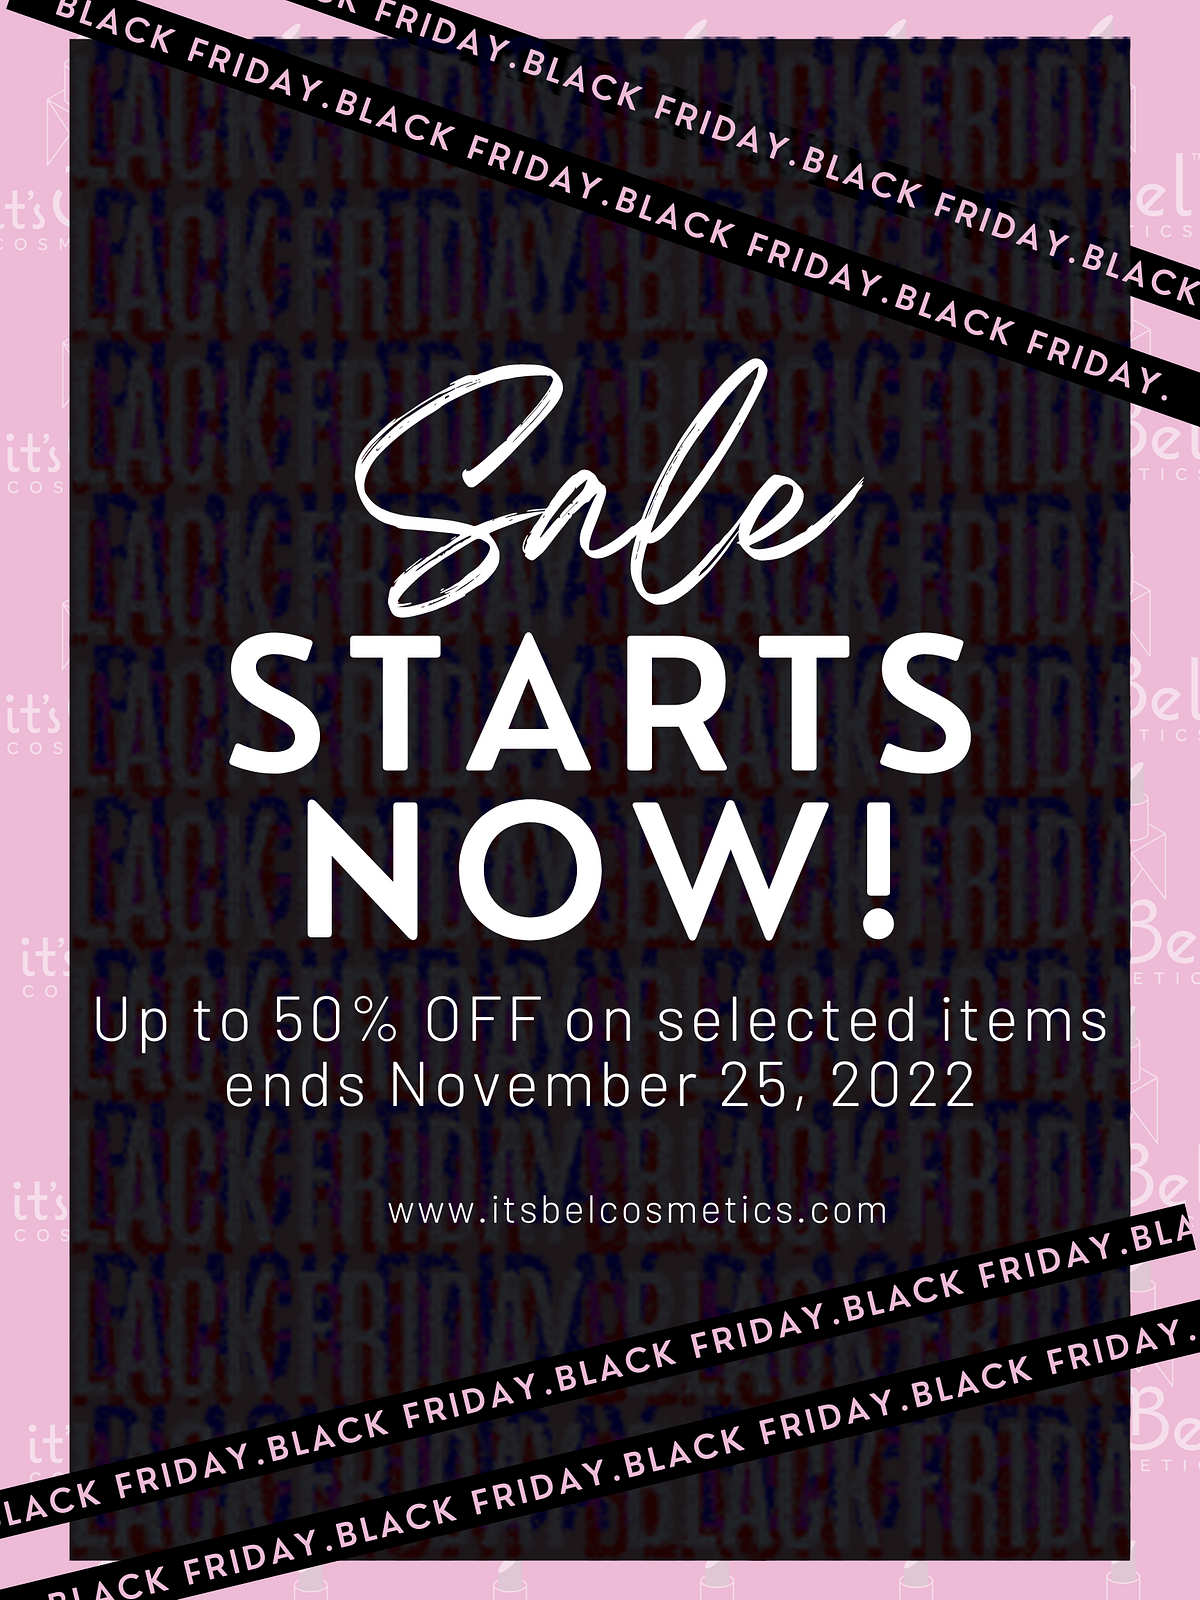  Up to 50% OFF on selected items ends November 25, 2022 